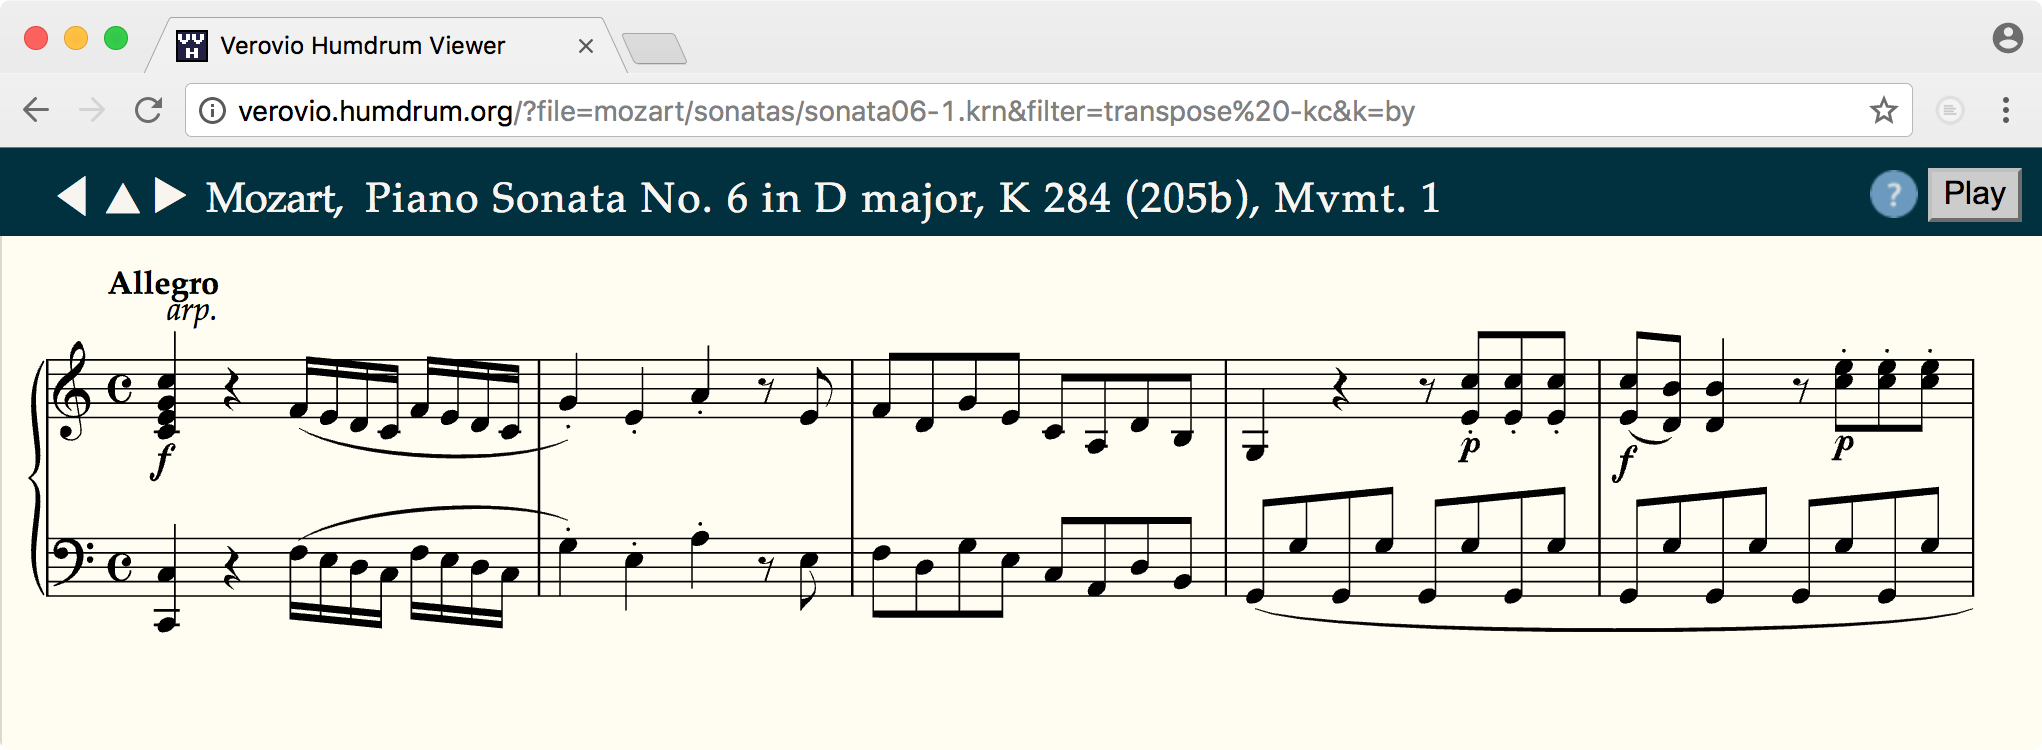 Mozart sonata k284 transposed to C major, in data as well